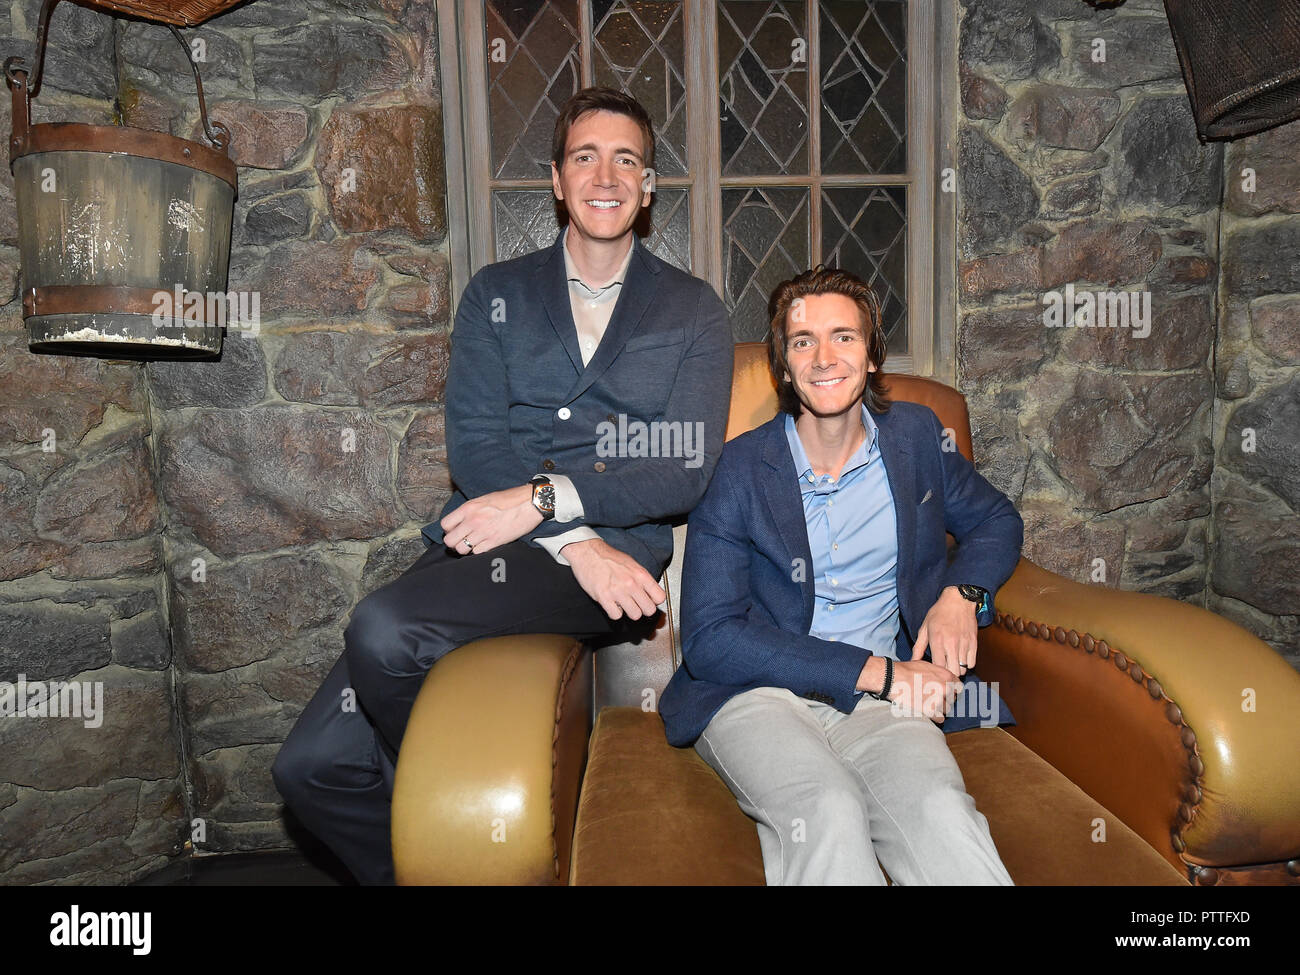 Potsdam, Brandenburg. 11th Oct, 2018. The actors James (r) and Oliver Phelps who sit in the Harry Potter films The Weasley Twins at the press conference for the "Harry Potter" exhibition in the set of Hagrid's hut. The exhibition, which opens for visitors on Saturday (13.10.2018) in the Filmpark Babelsberg, shows costumes and complete sets of the film series. Credit: Bernd Settnik/dpa-Zentralbild/dpa/Alamy Live News Stock Photo